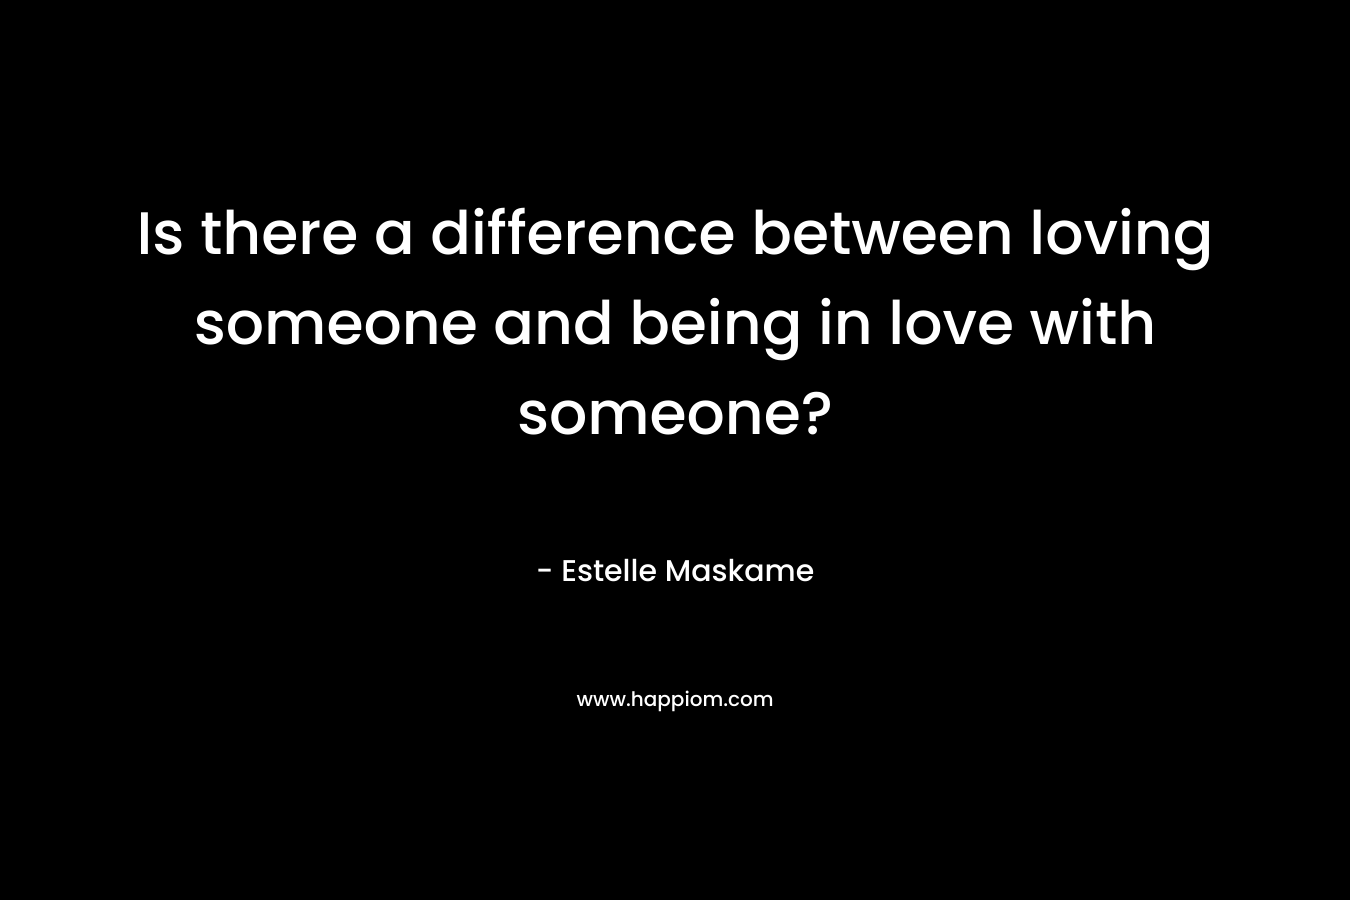 Is there a difference between loving someone and being in love with someone?